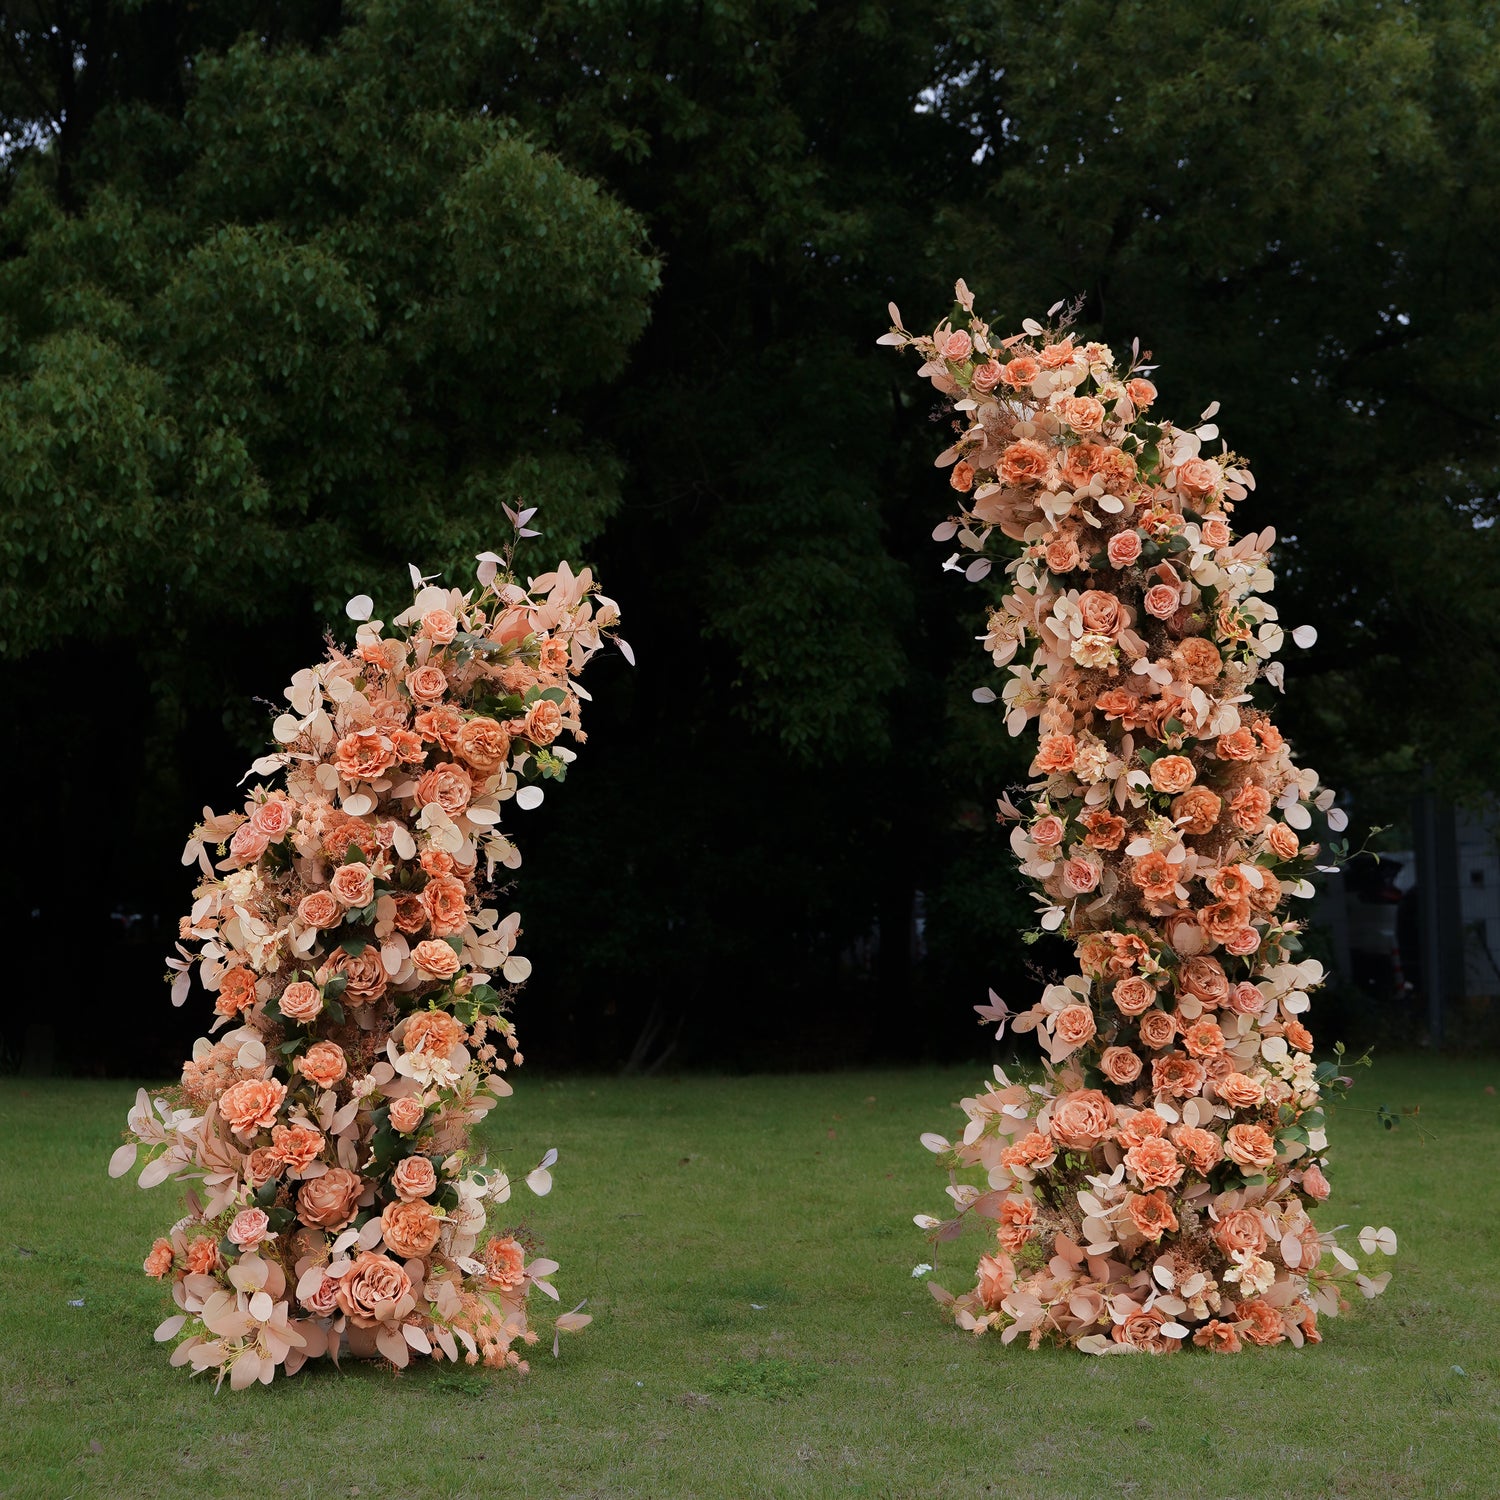 Rose Morning Maven flower arch is a flower arch made of artificial flowers for weddings, parties, birthdays and other events. The flower arch is made of metal frame, easy to assemble and disassemble. Big enough for your guests to take pictures and keep. Flower arches are made of high quality material and durable. The color of the floral arch can be chosen according to your wedding theme. A floral arch is the perfect decoration for any occasion and is sure to impress your guests.